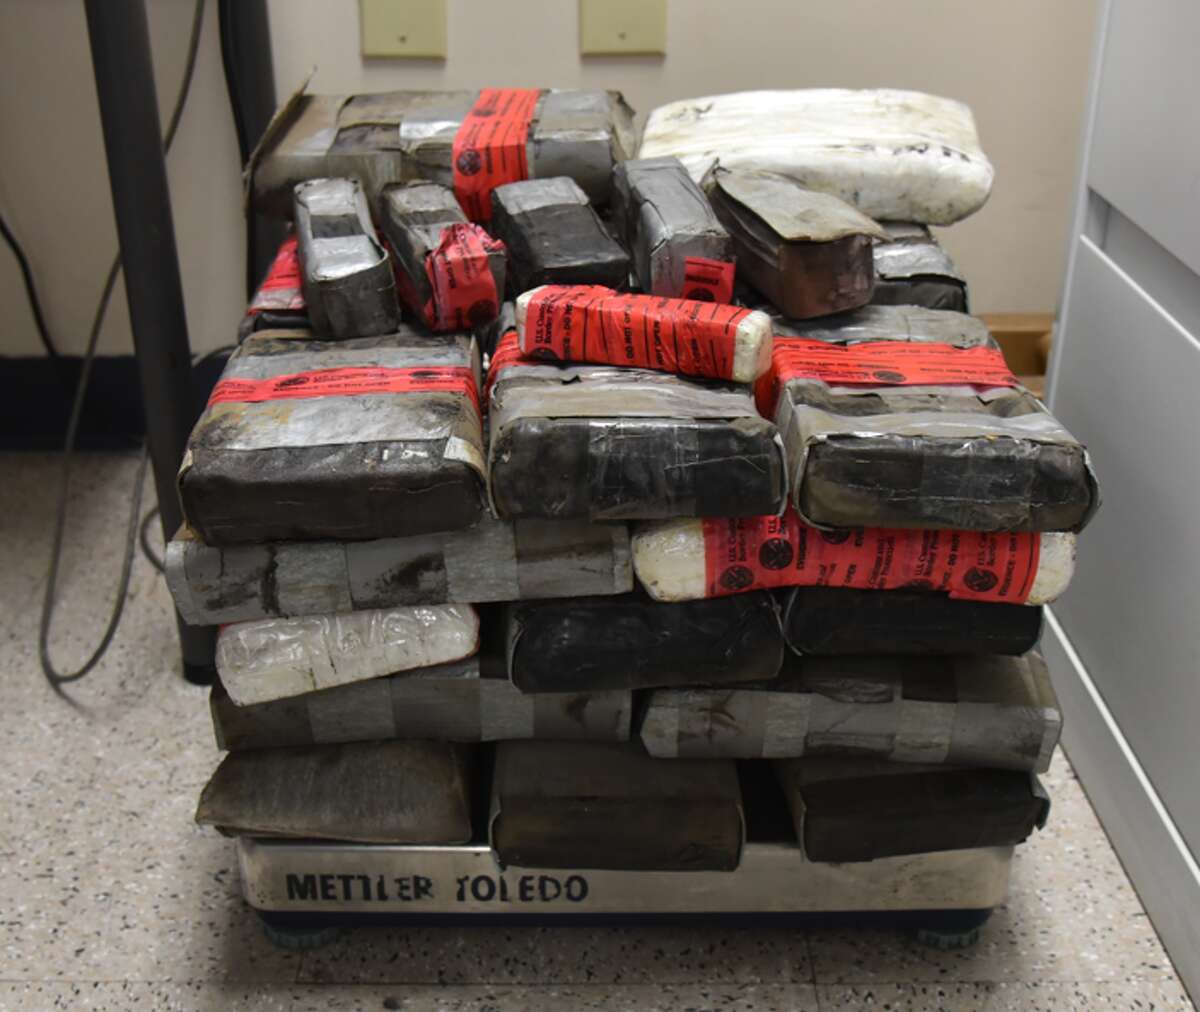 U.S. Customs and Border Protection officers said they seized 87 pounds of cocaine at the World Trade Bridge on July 7. The contraband had an estimated street value of $671,160.